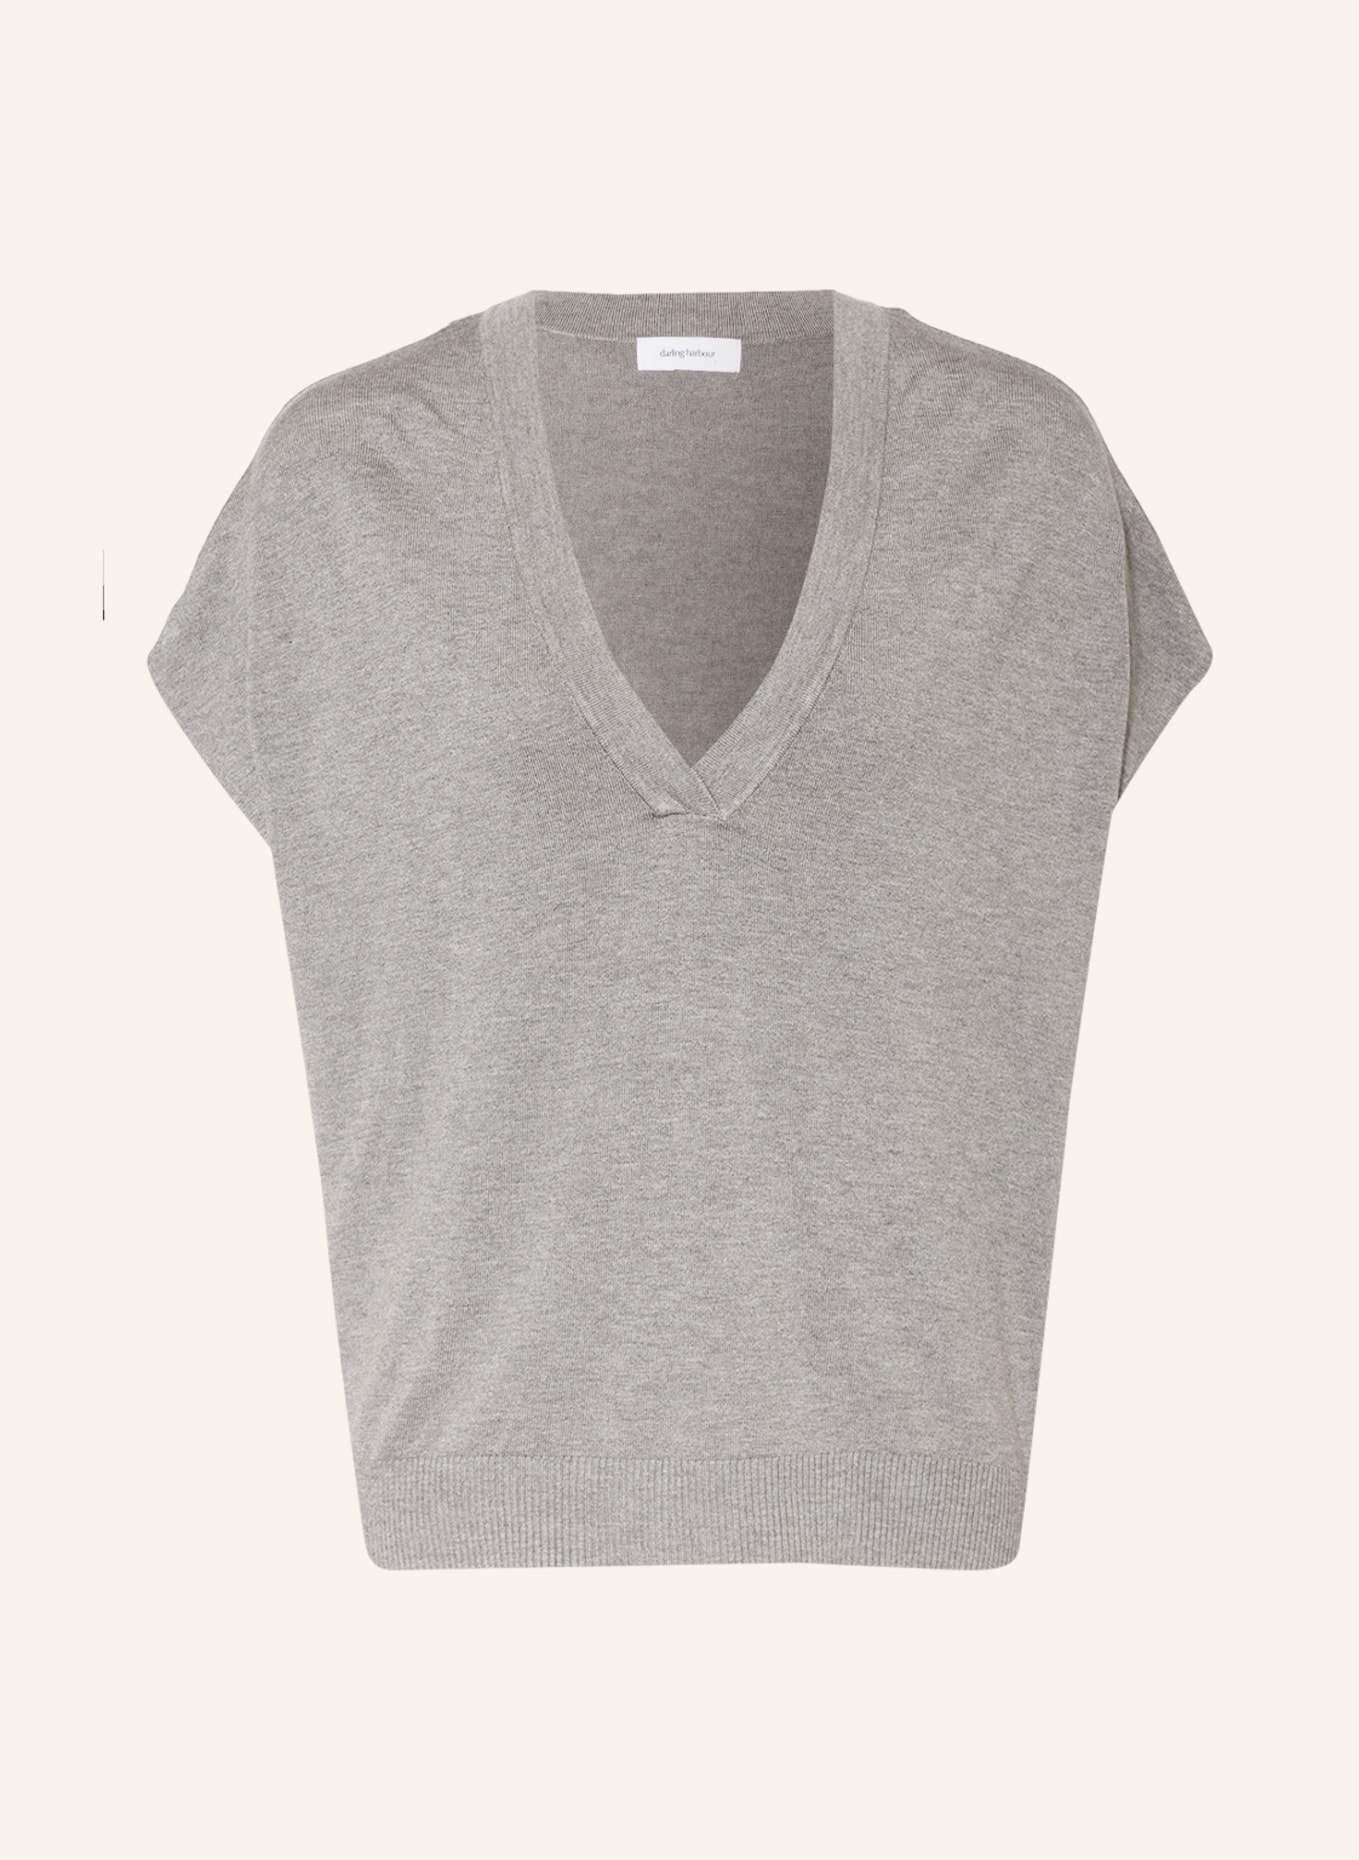 darling harbour Sleeveless sweater, Color: GRAY (Image 1)